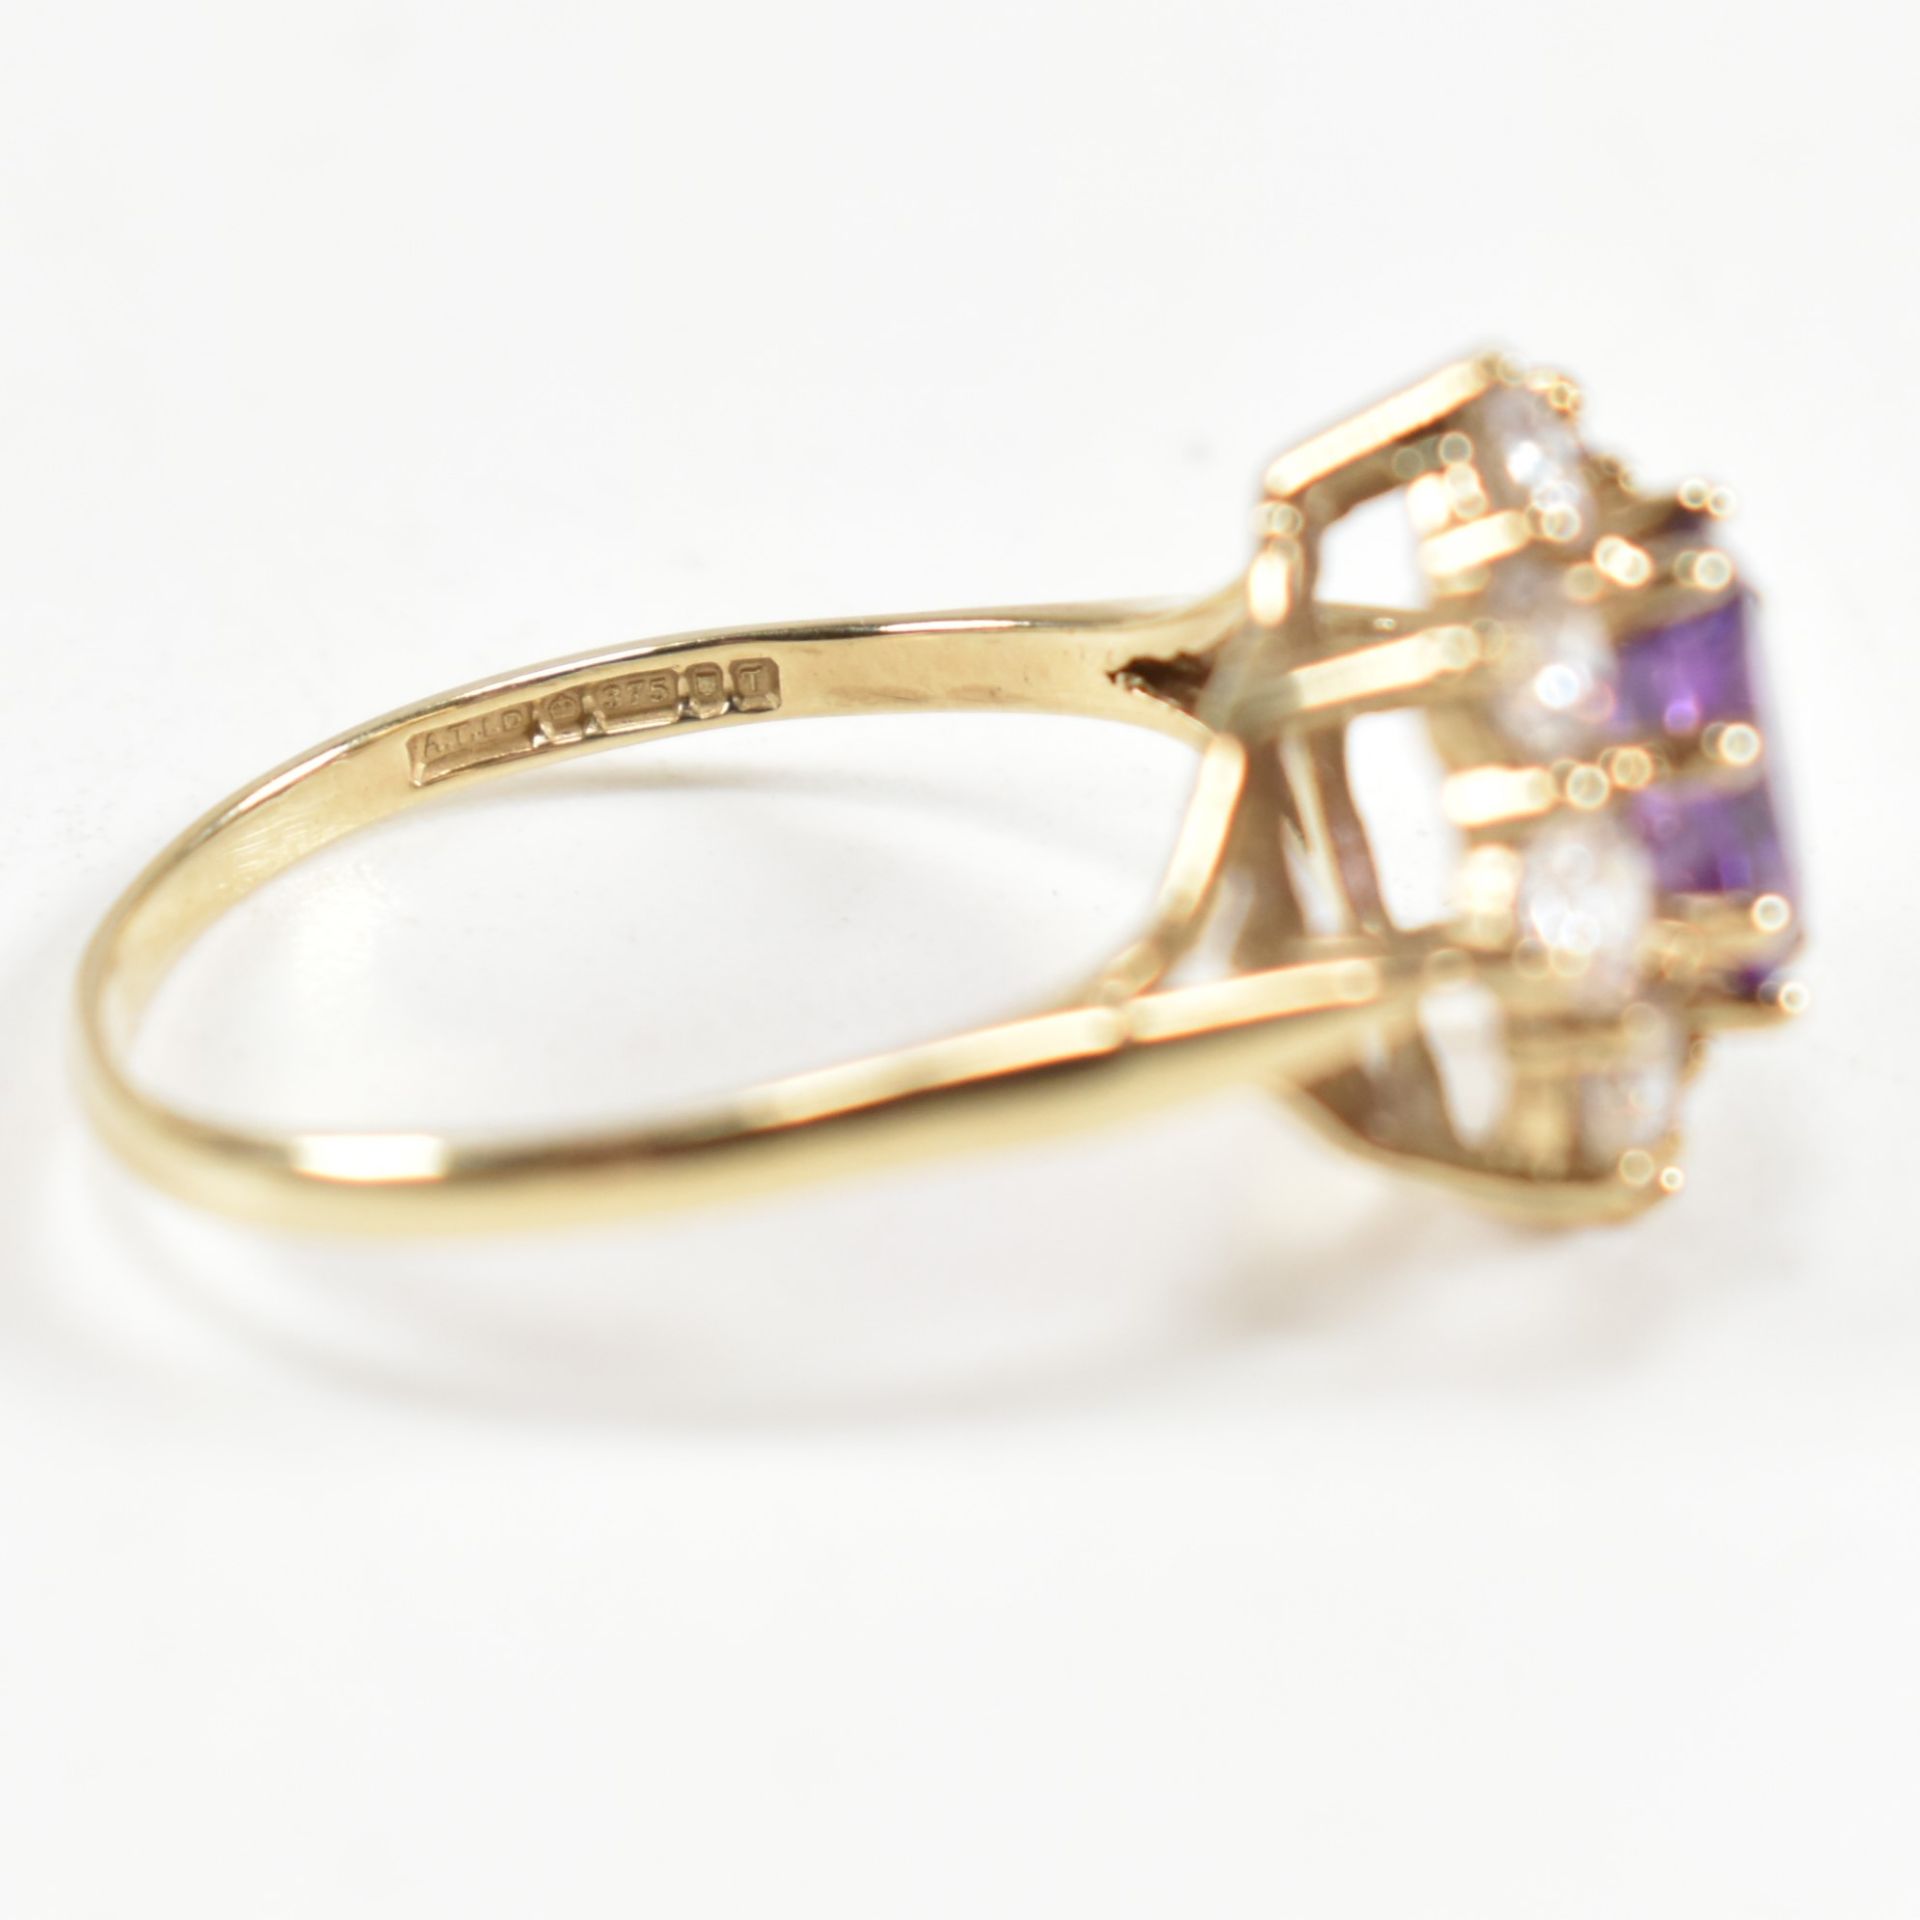 HALLMARKED 9CT GOLD AMETHYST & WHITE STONE CLUSTER RING - Image 9 of 9